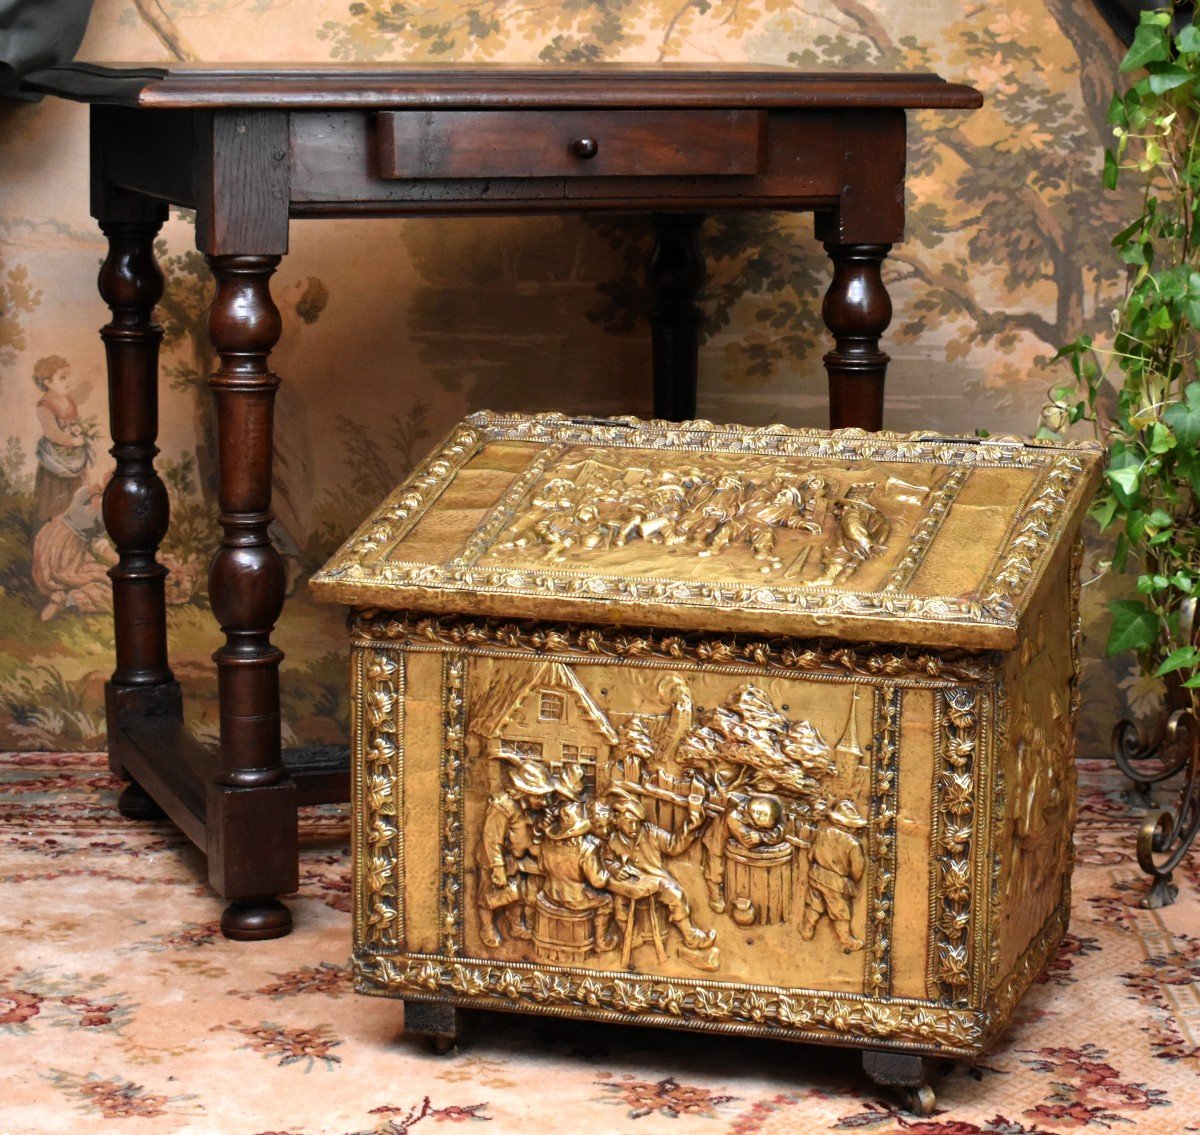 Cast Brass Chest, Humorous Village Scenes Decor, Tavern And Bowling Game